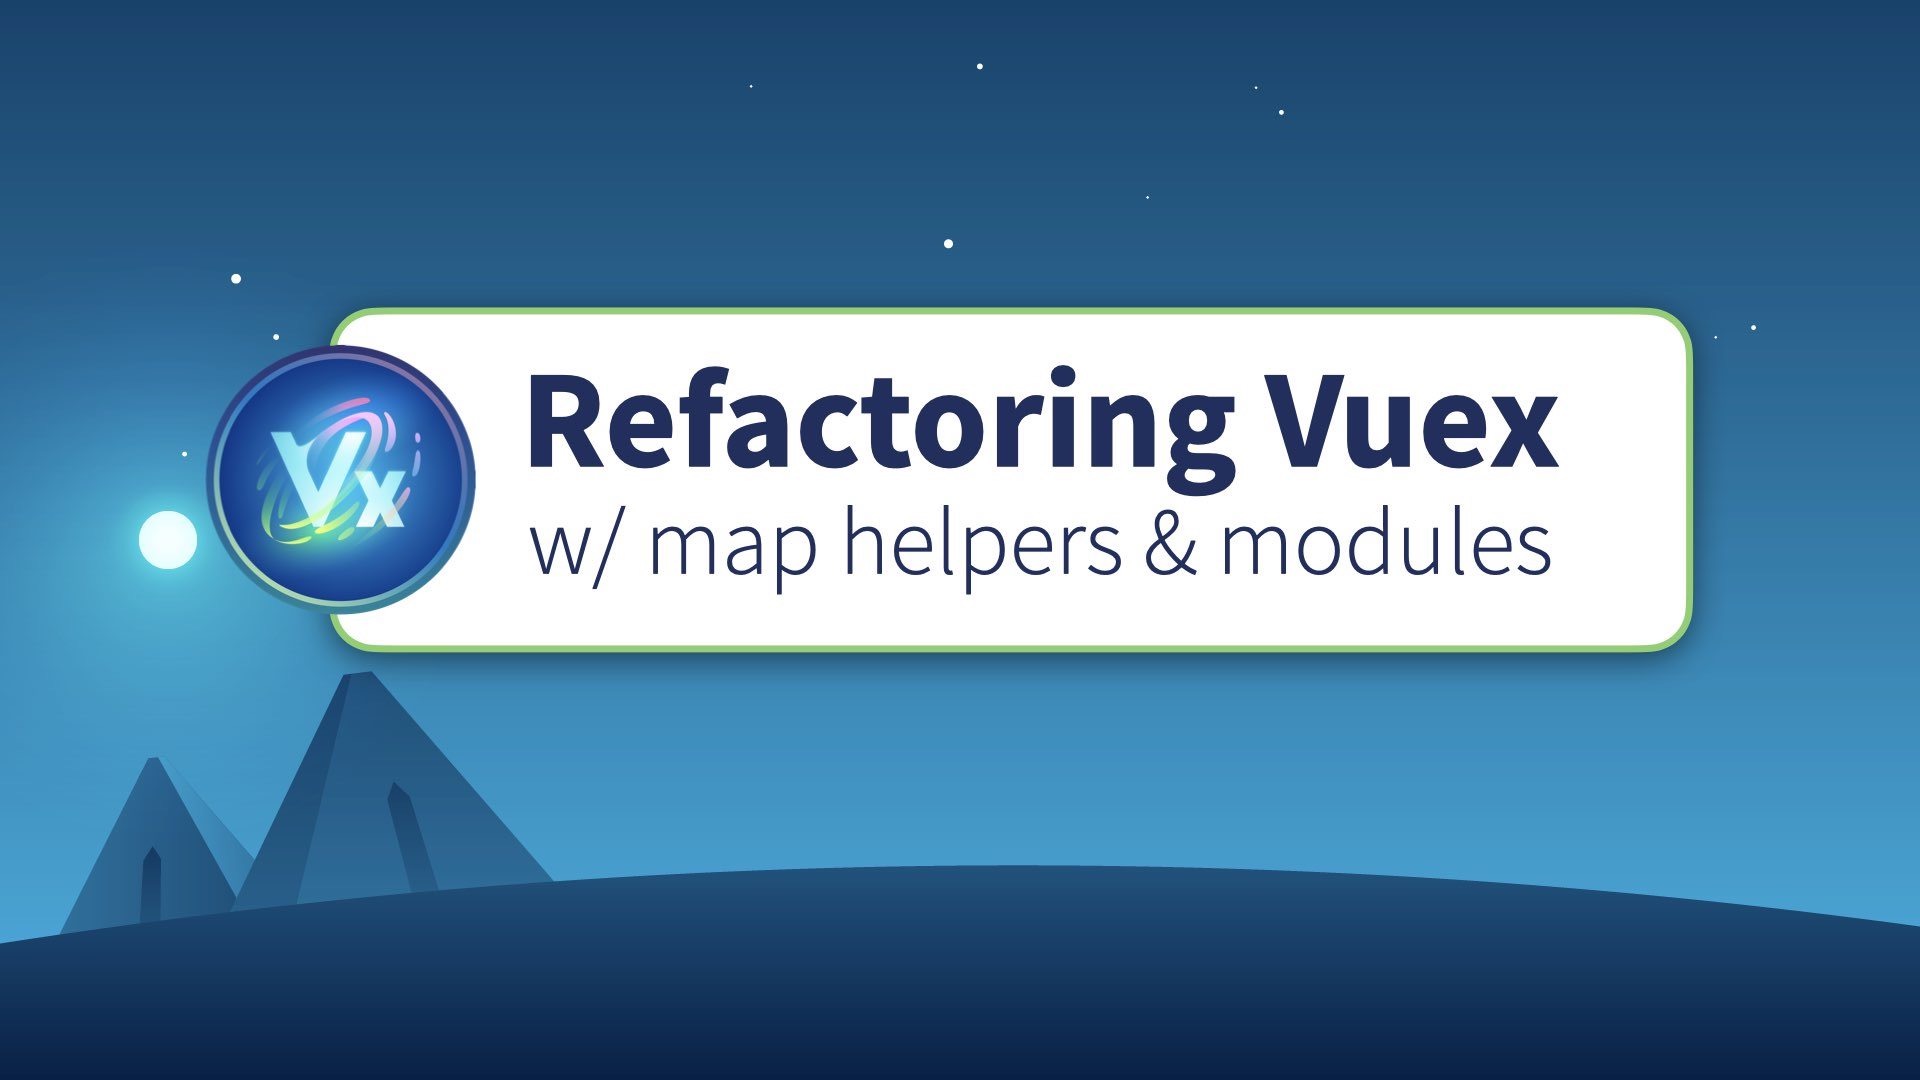 Refactoring Vuex with Map Helpers and Modules